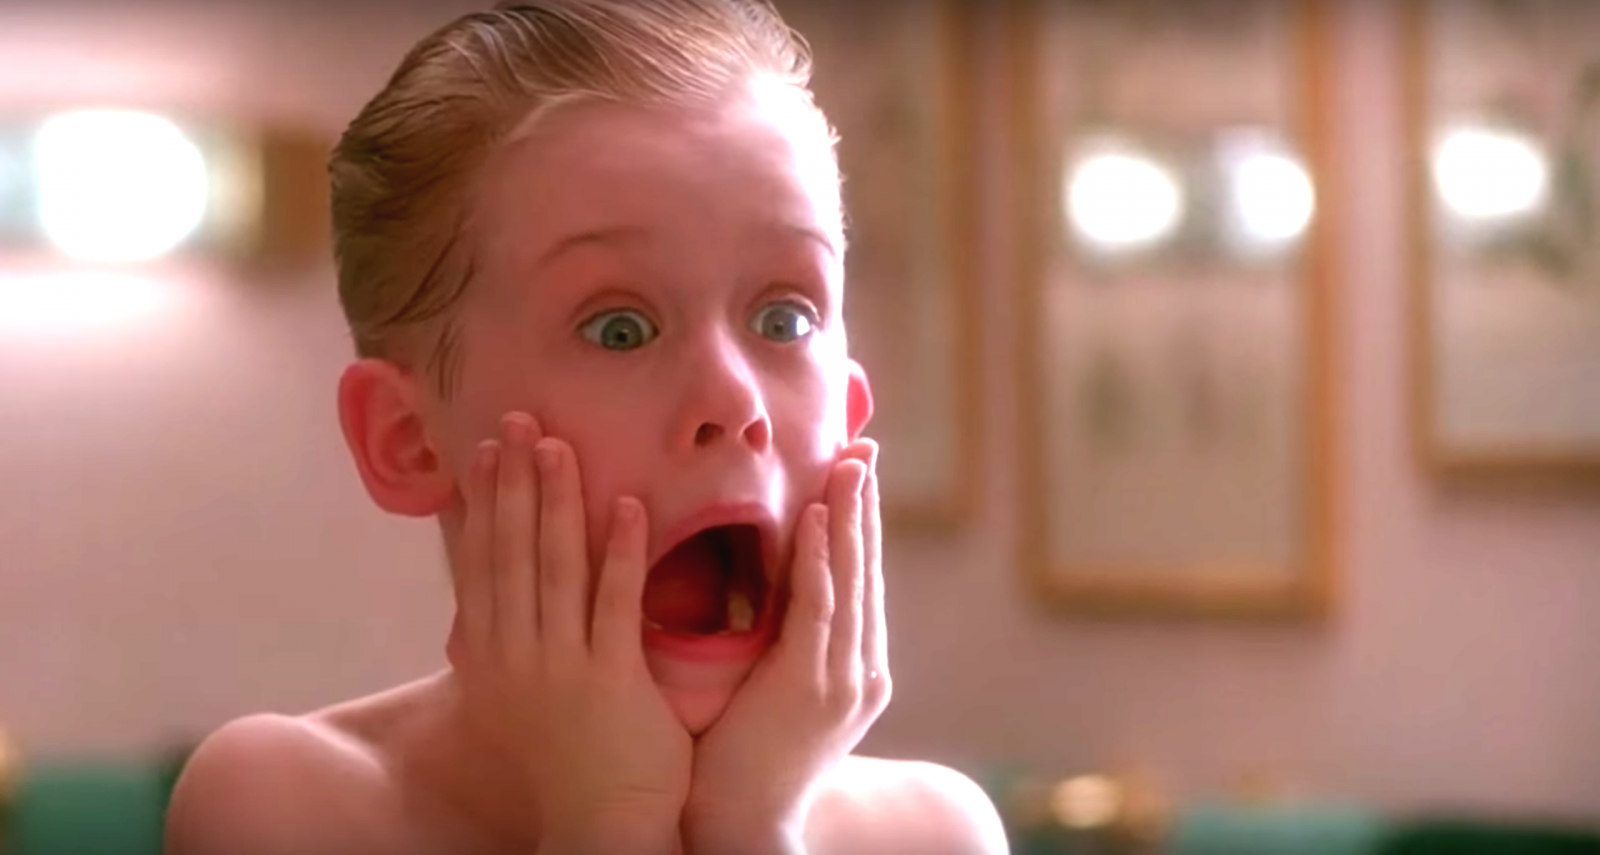 Home Alone, now on our list of Disney Christmas movies